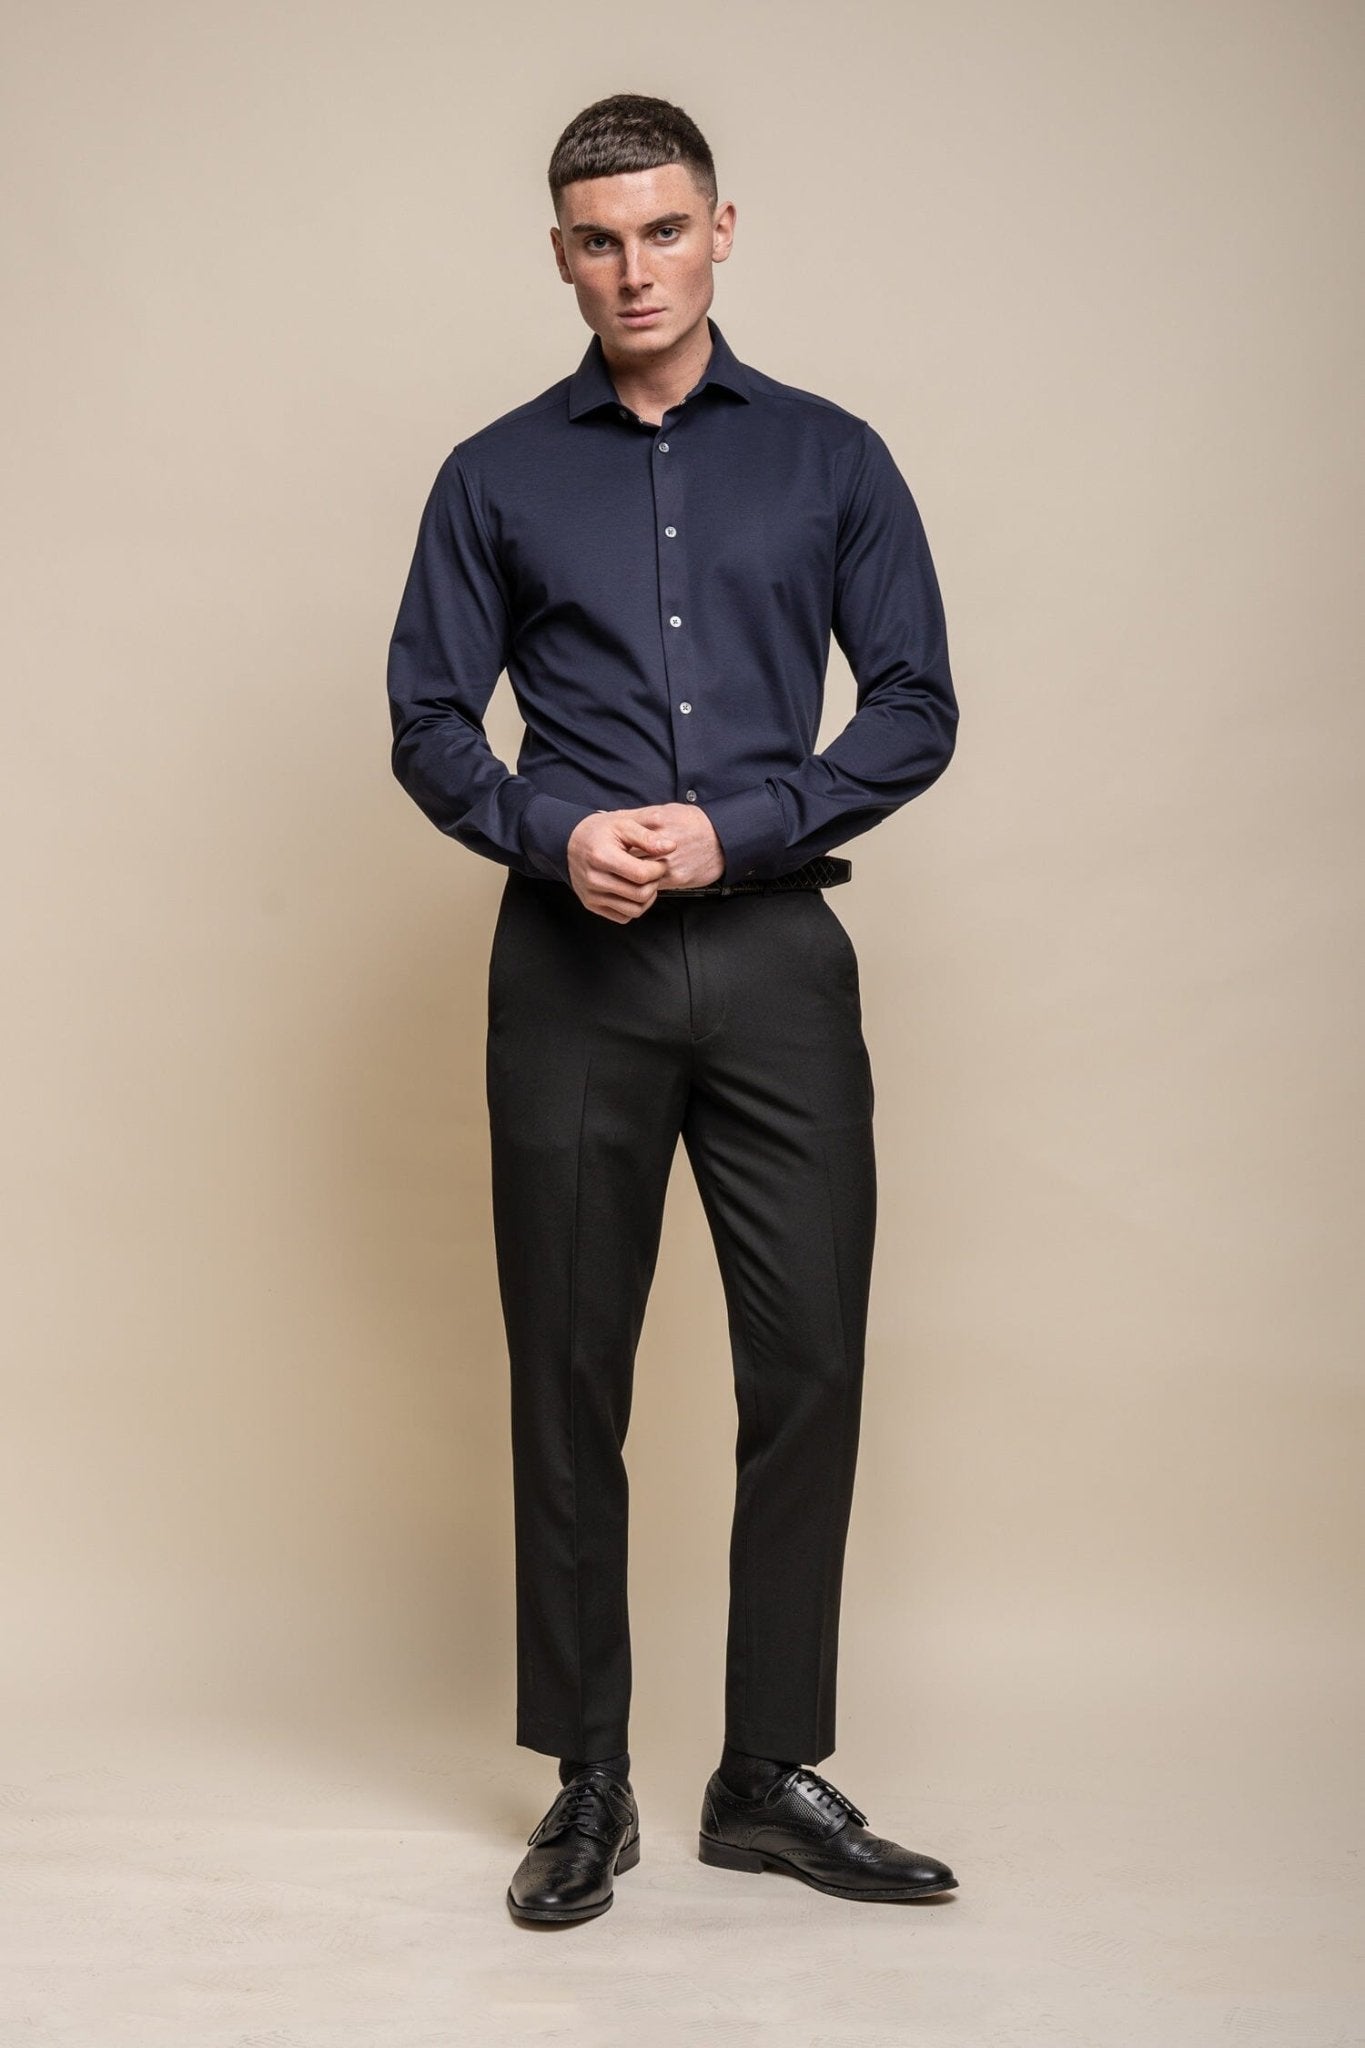 Ashley Navy Shirt - Shirts - S/14.5 - Swagger & Swoon